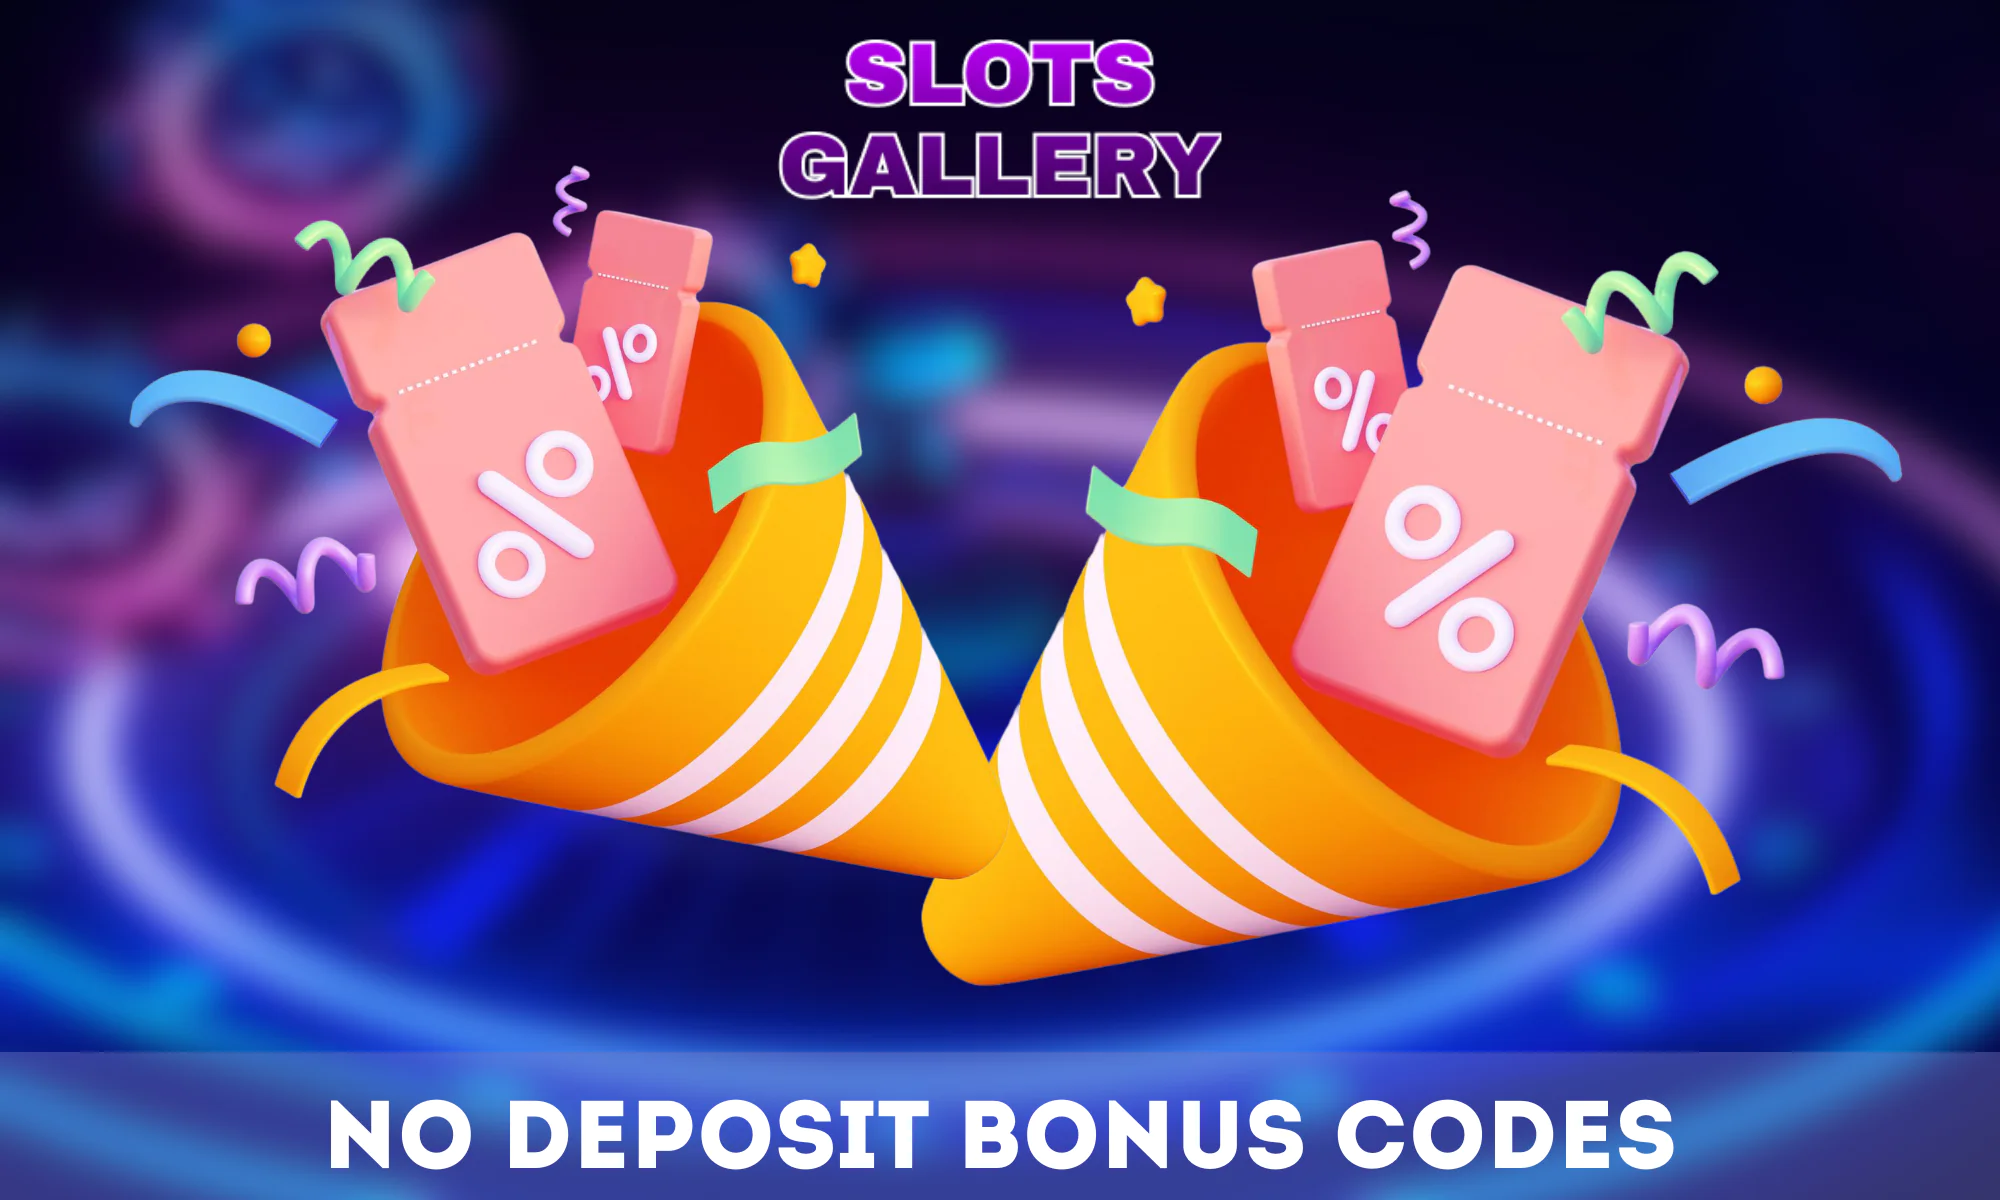 Slots Gallery has a special no deposit bonus for all players